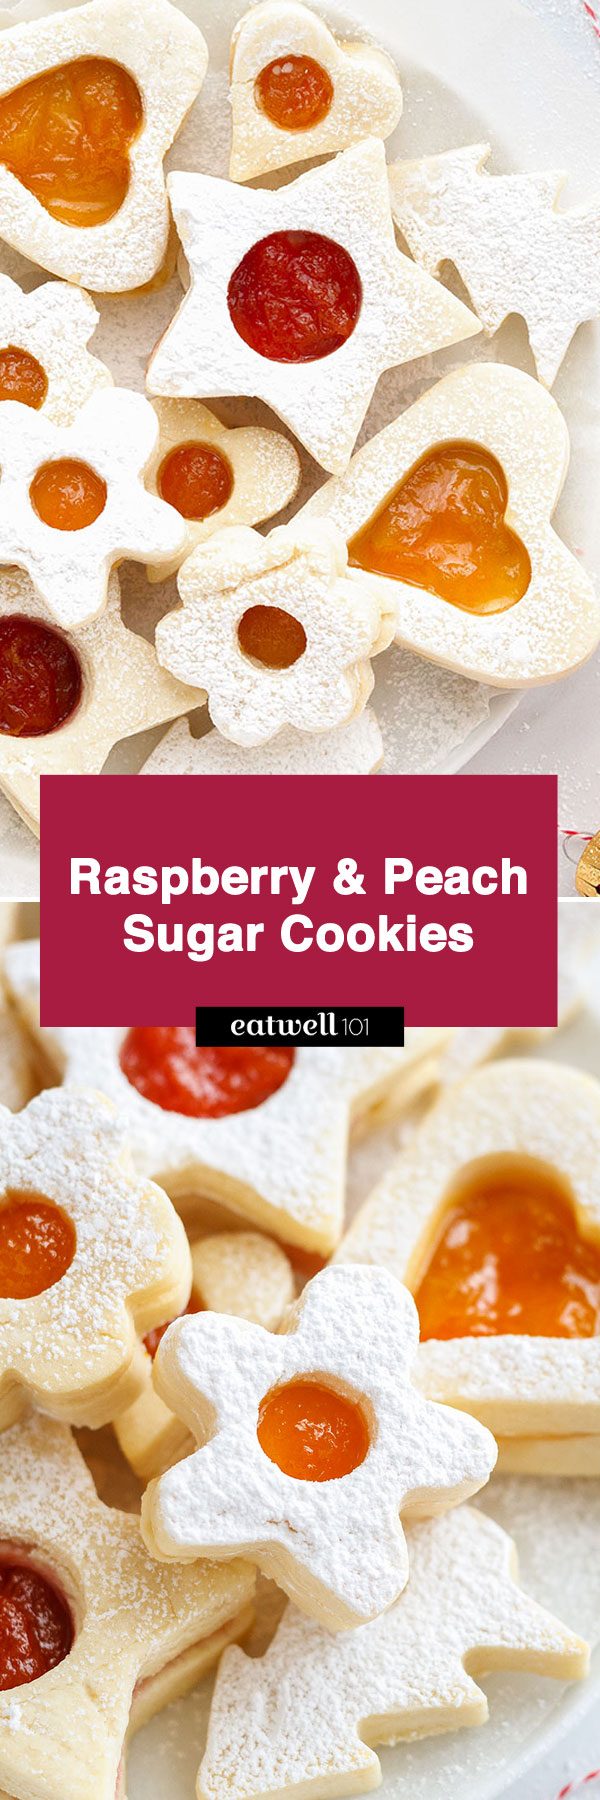 Raspberry and Peach  Sugar Cookies — These treats are sure to sweeten up your Christmas, and impress friends at your next cookie swap!